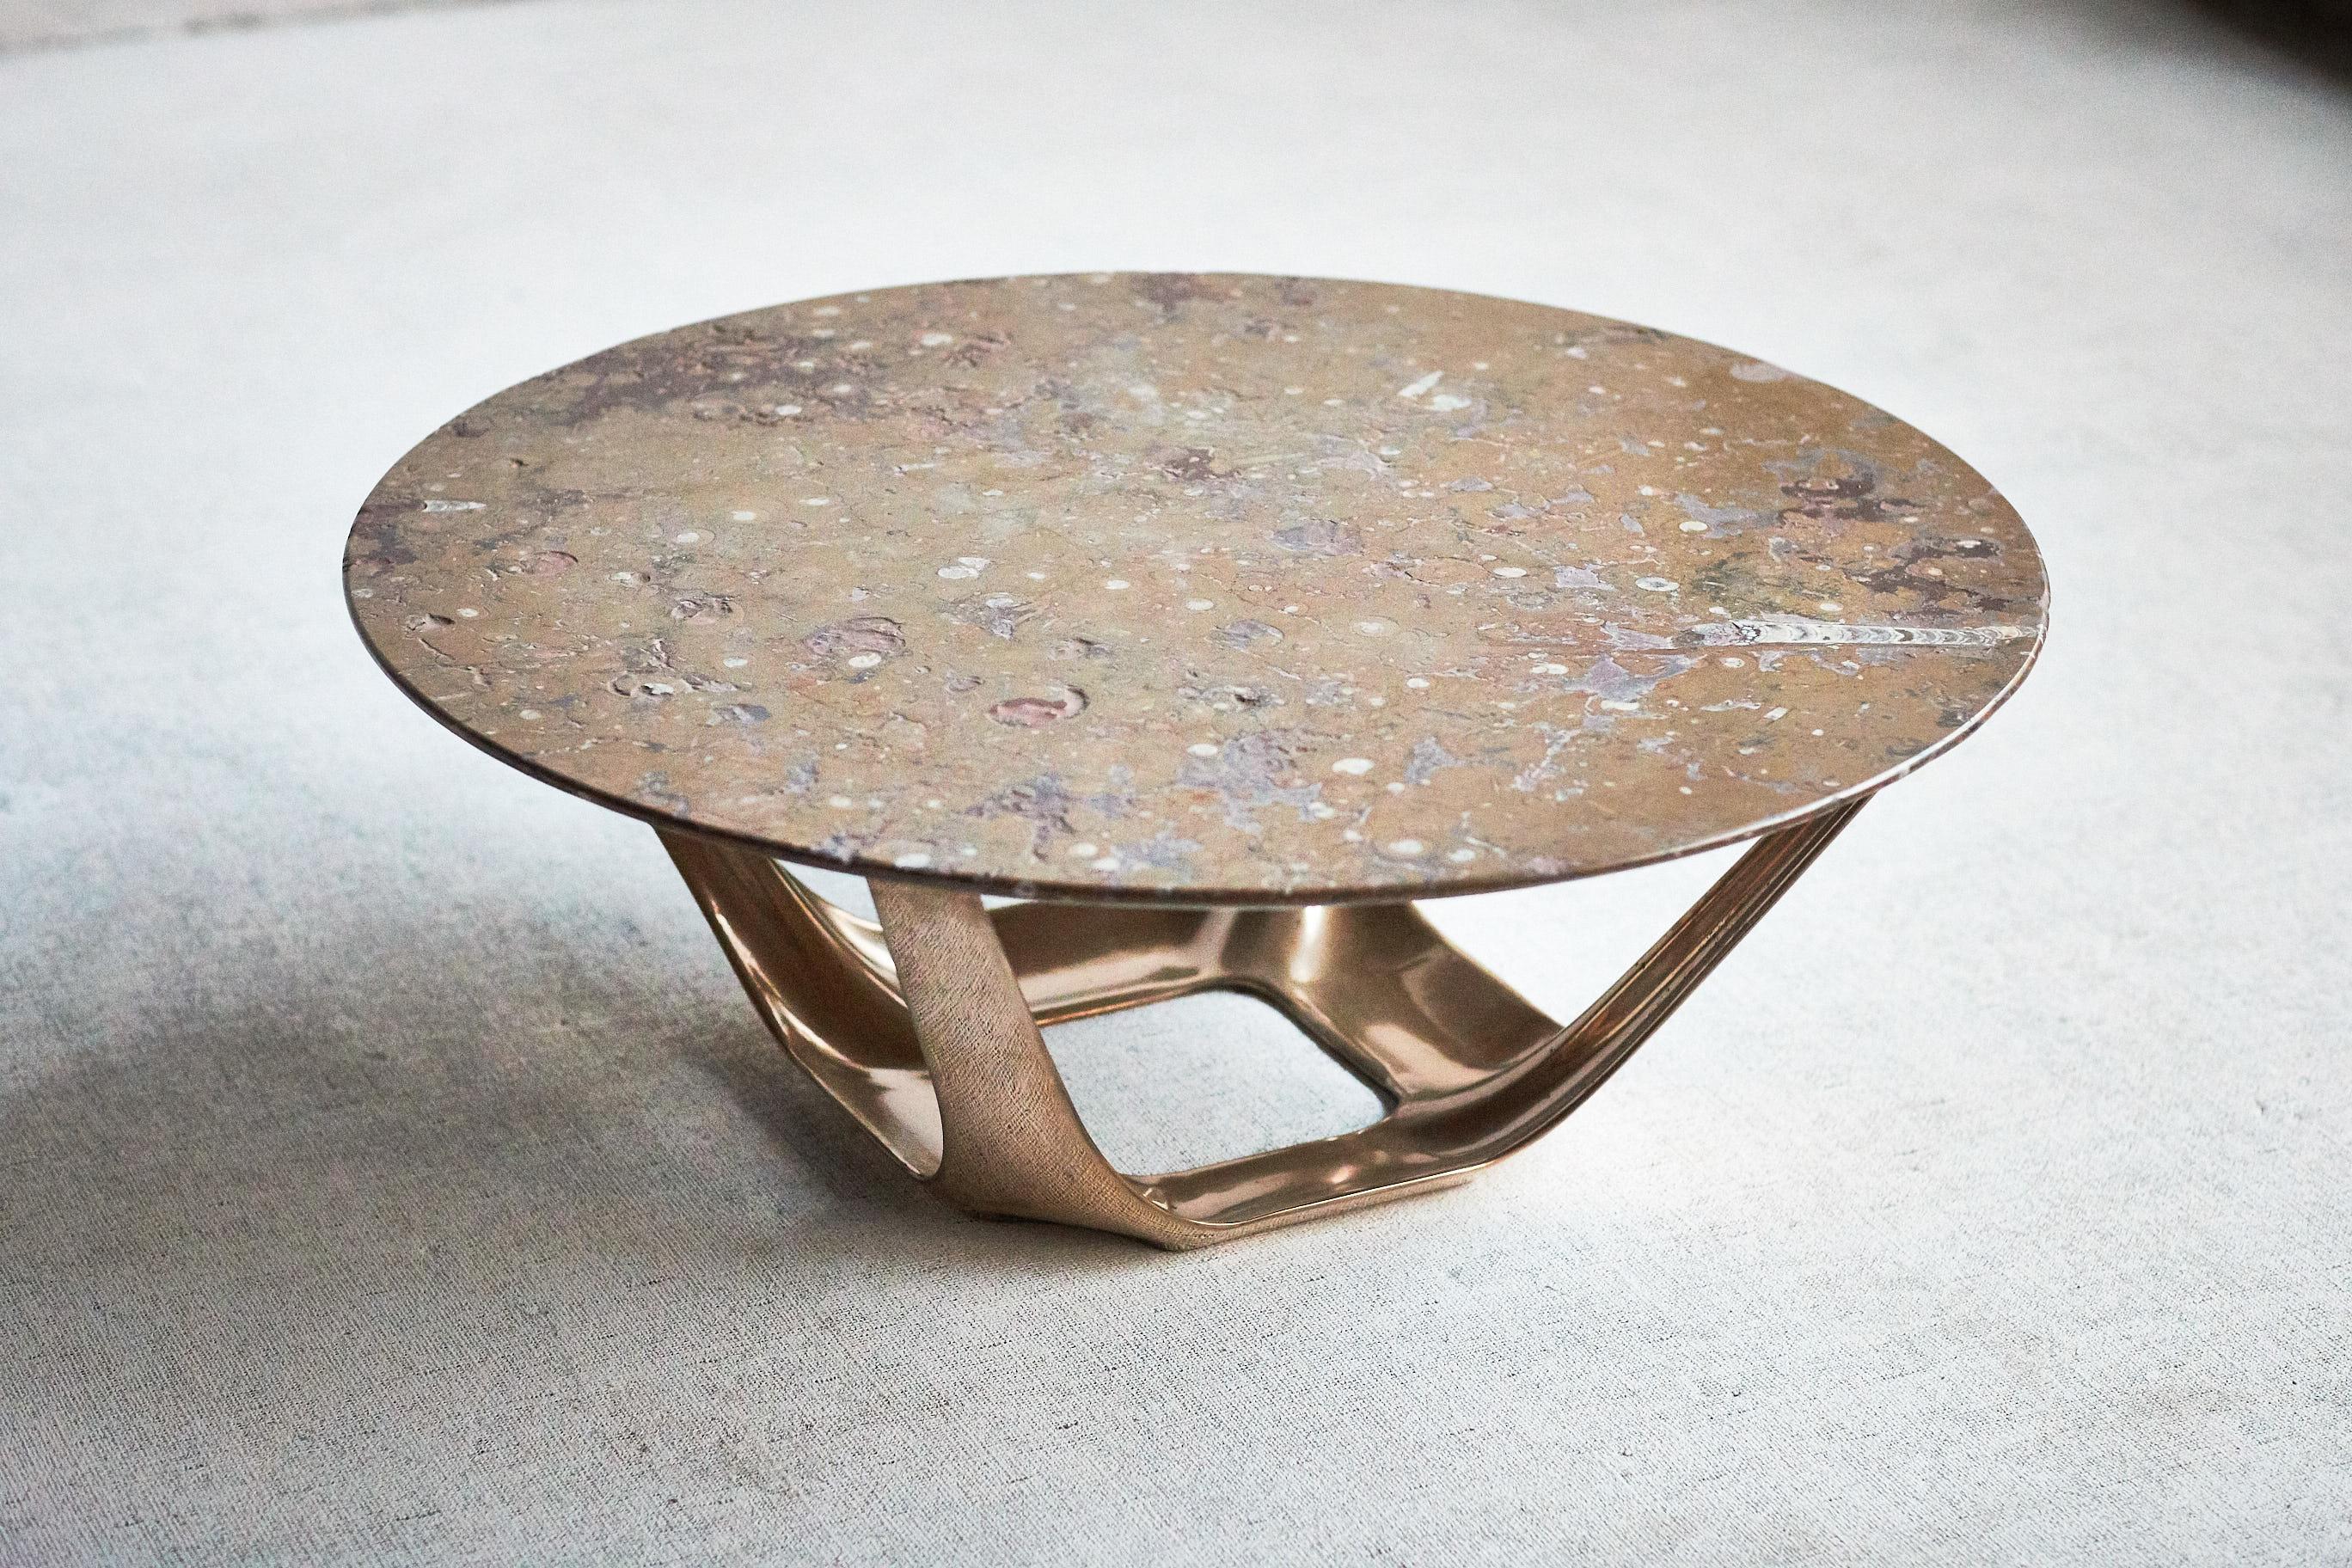 Designed by Daniel Barbera, the Heron coffee table, is a muscular sandcast solid bronze base with four organic forms rising from the base to support the top. The form is hand finished to a smooth mirror polish, with the option of a satin or